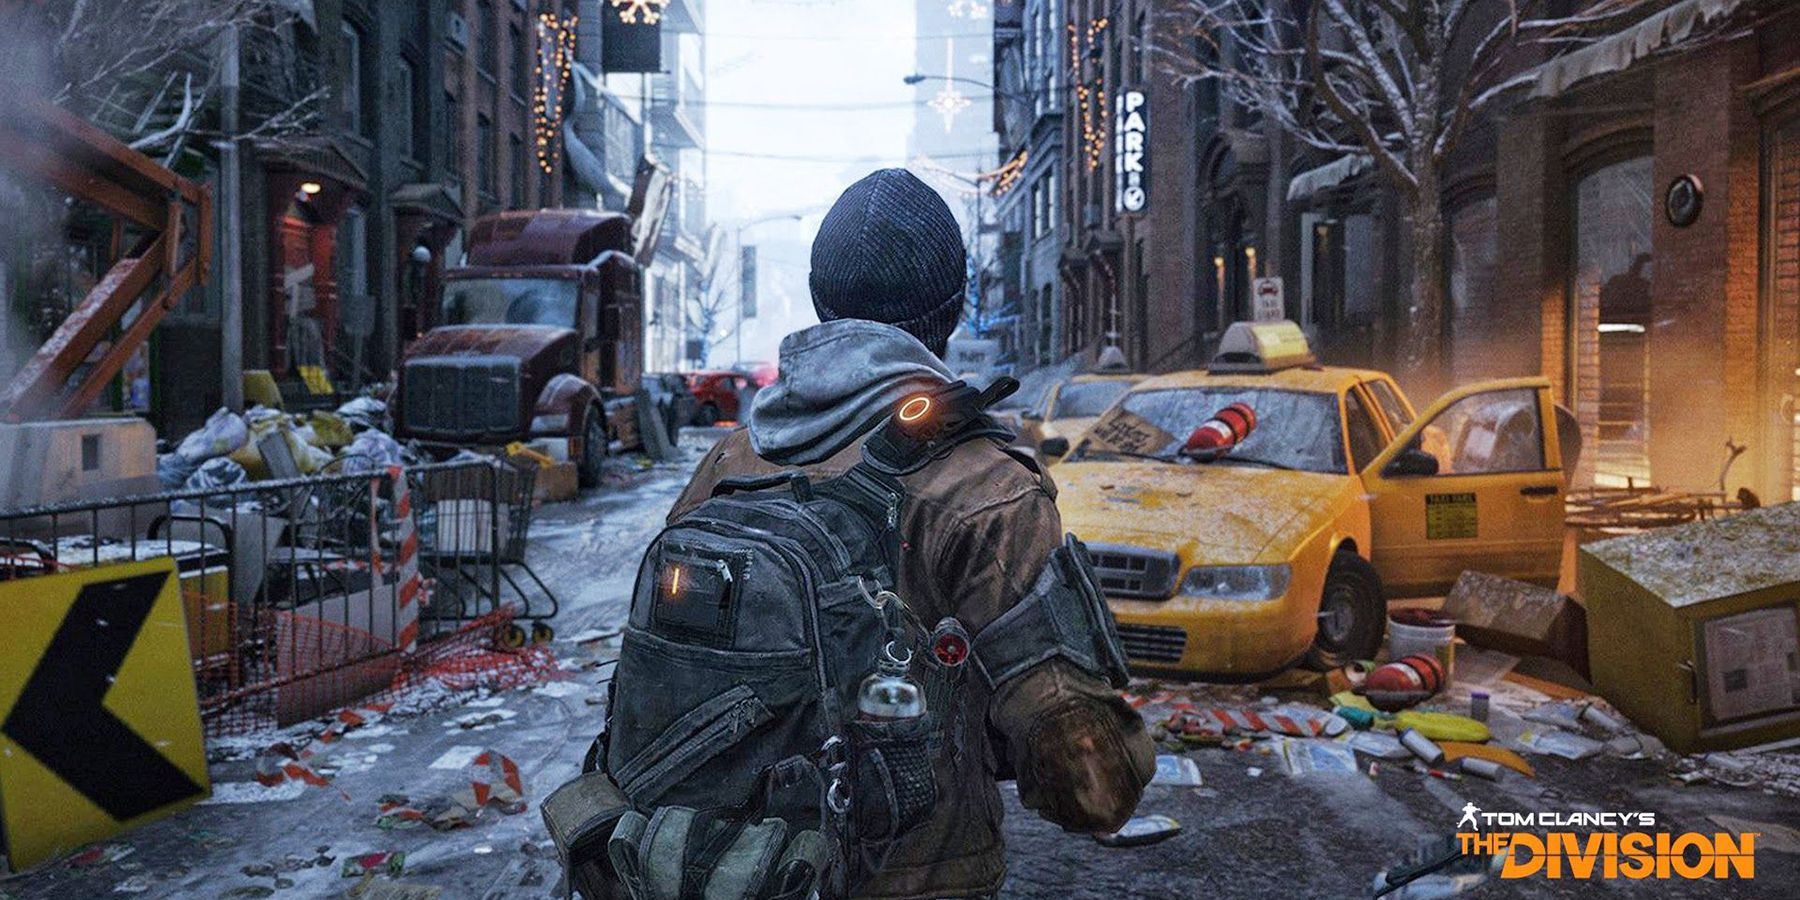 tom clancy's the division agent trash filled street